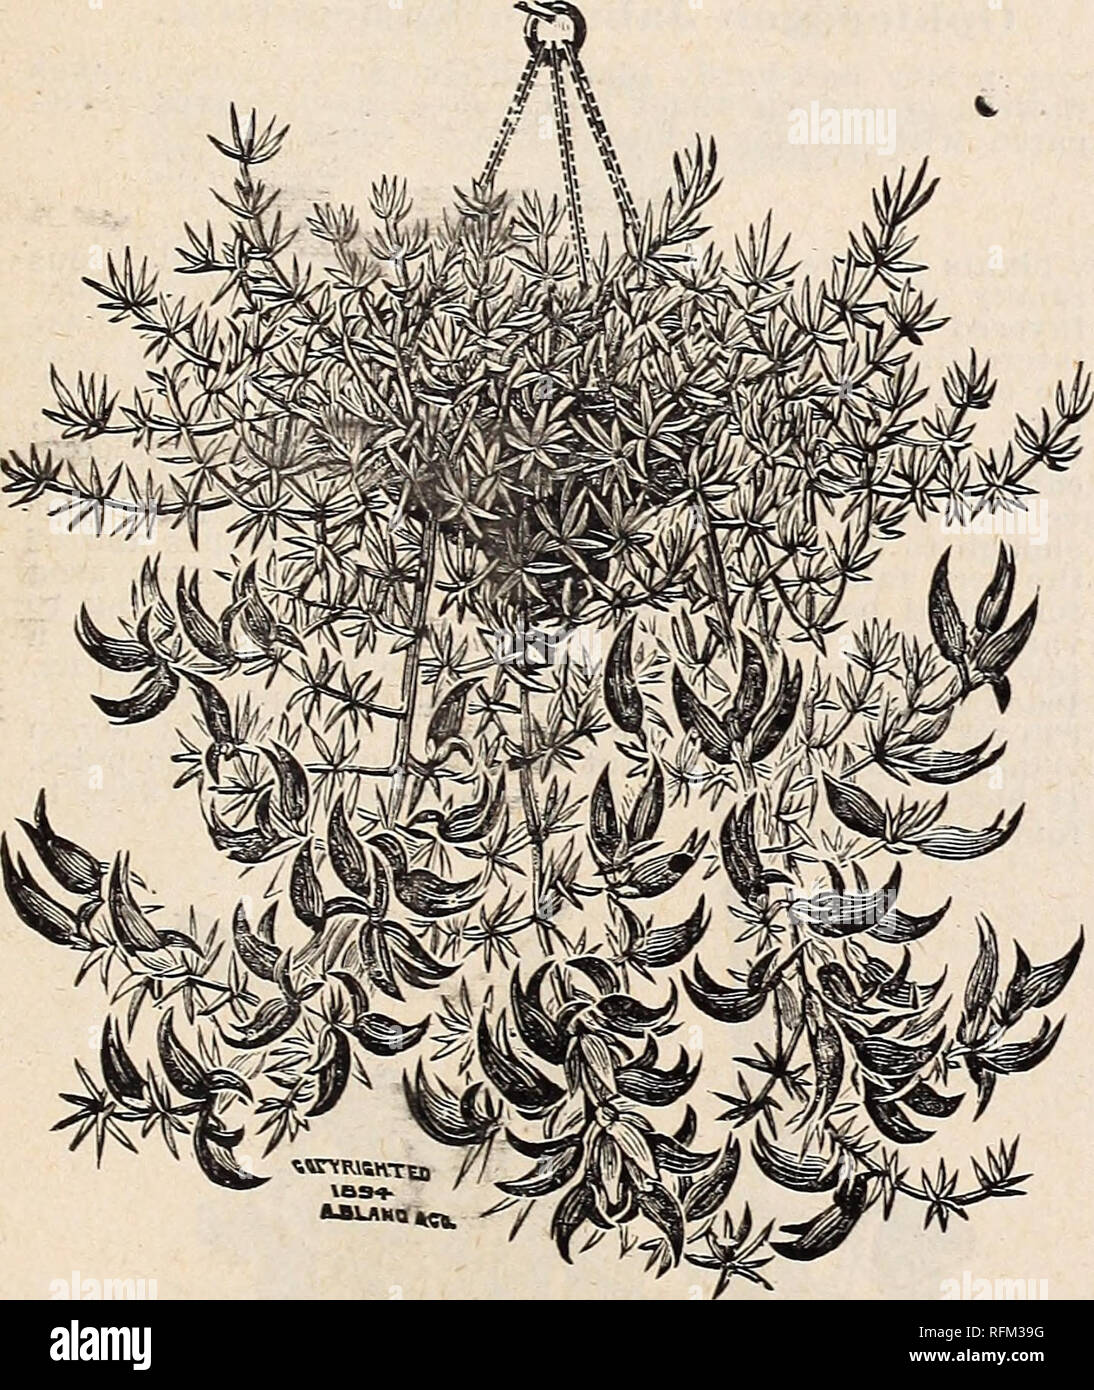 . Floral catalogue : illustrated. Nurseries (Horticulture) Kentucky Louisville Catalogs; Plants, Ornamental Catalogs; Flowers Catalogs; Trees Seedlings Catalogs; Fruit Catalogs. L0VI8YTLLE, KY. 73 Lobelia. Splendid basket plant, producing hundreds of little blue, white or marmorated flowers without interruption. We cultivate three of the best varieties. Per dozen, 75 cents: per hundred, $5; 10 cents each. Lopezia Rosea. Free growing, red flowering plant, blooming constantly from November to April. 10 cents each. ALBA. Same as above; white flowering. 10 cents each. Lotus Peliorynchus.. (CORAL G Stock Photo